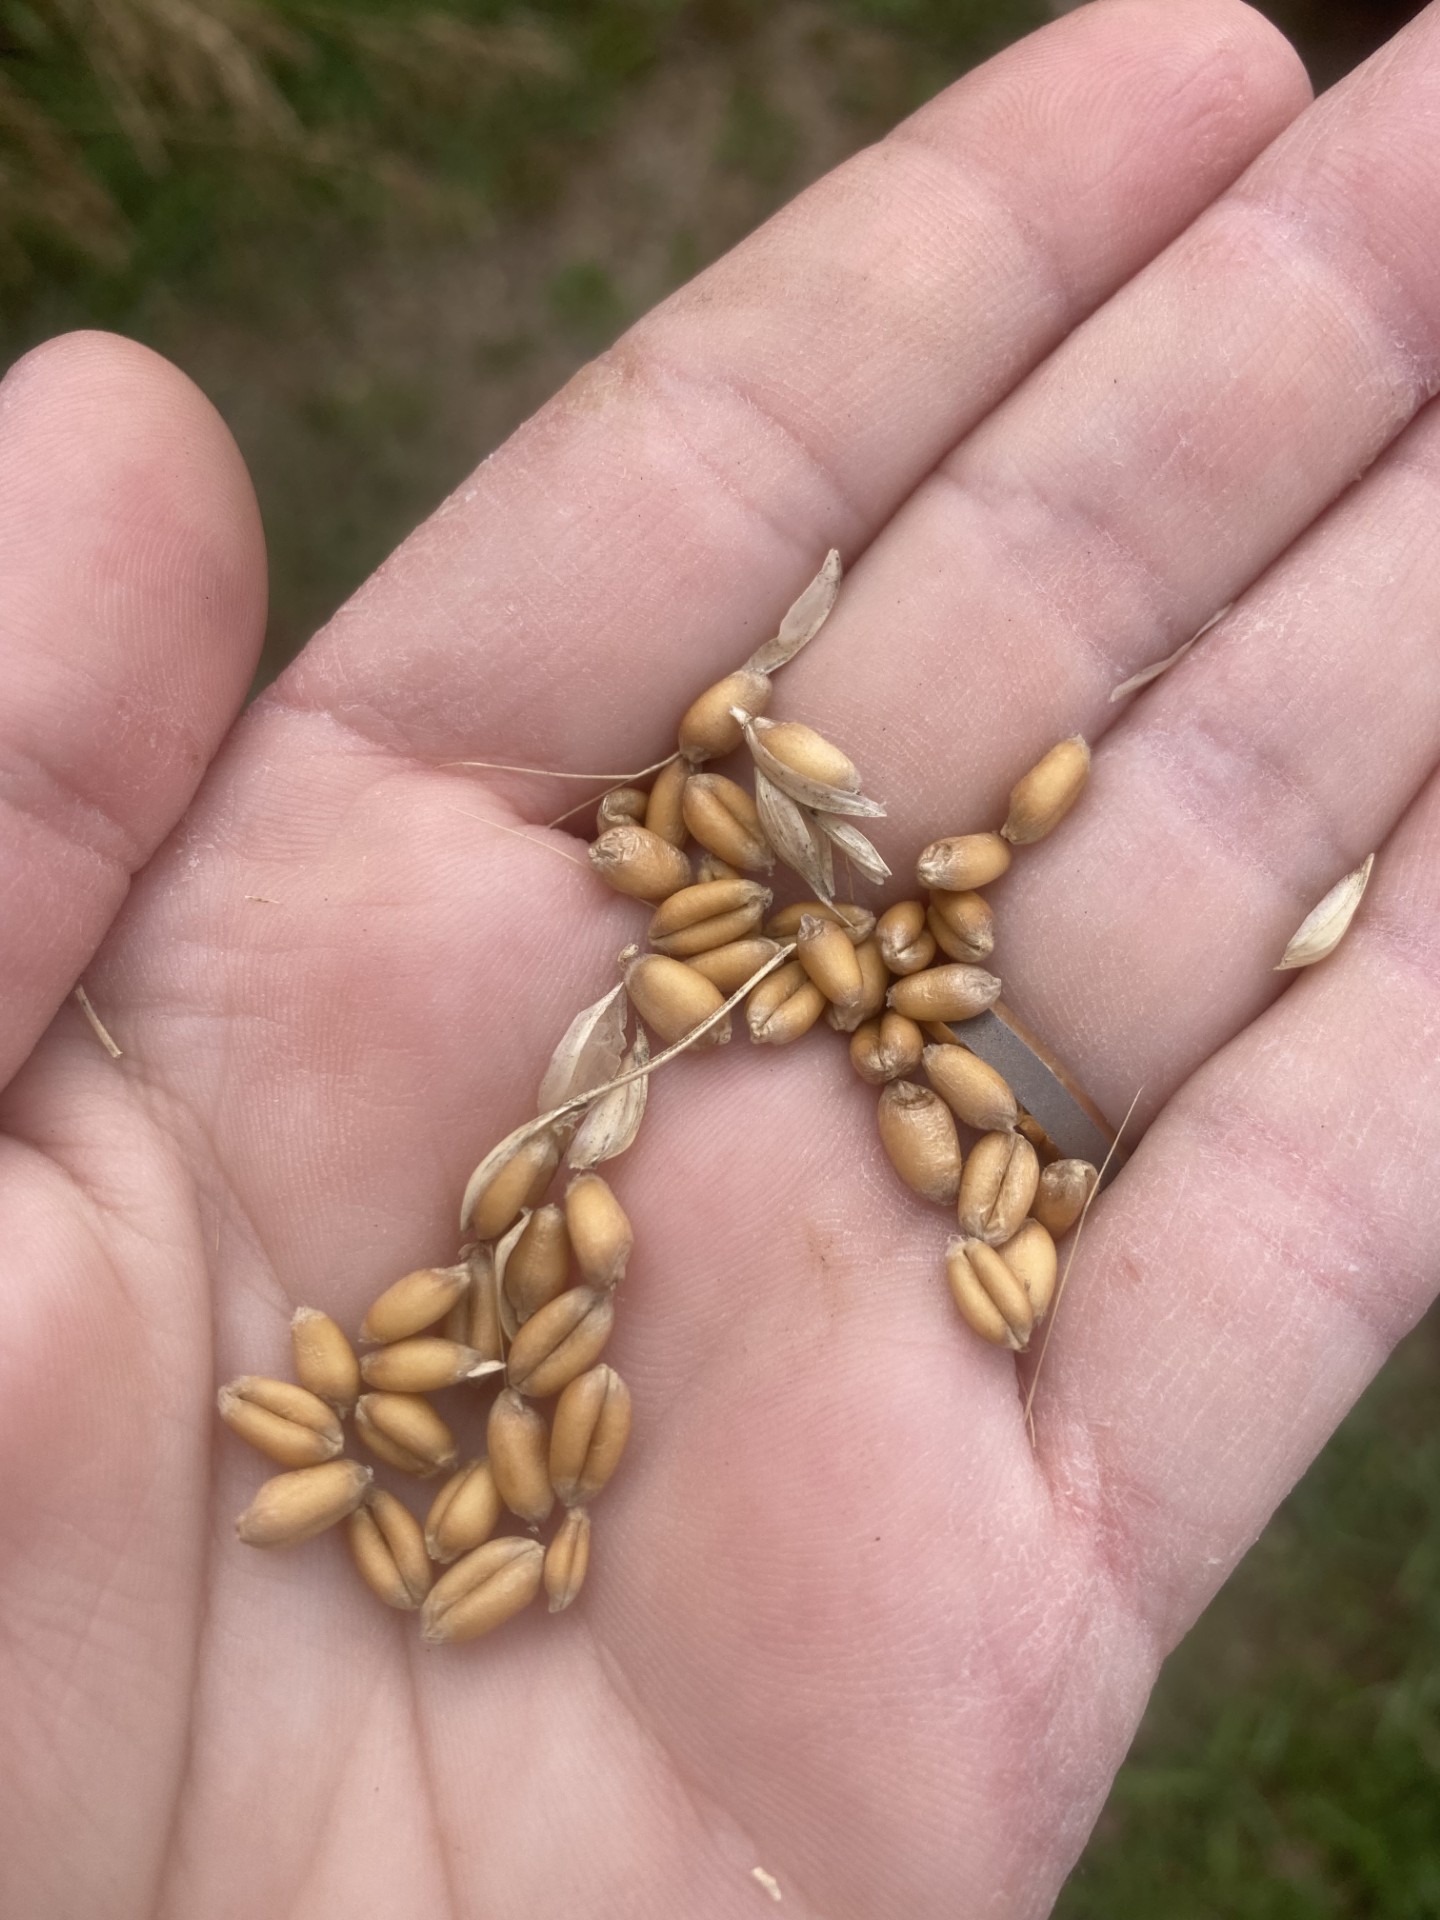 A hand holding wheat kernels.